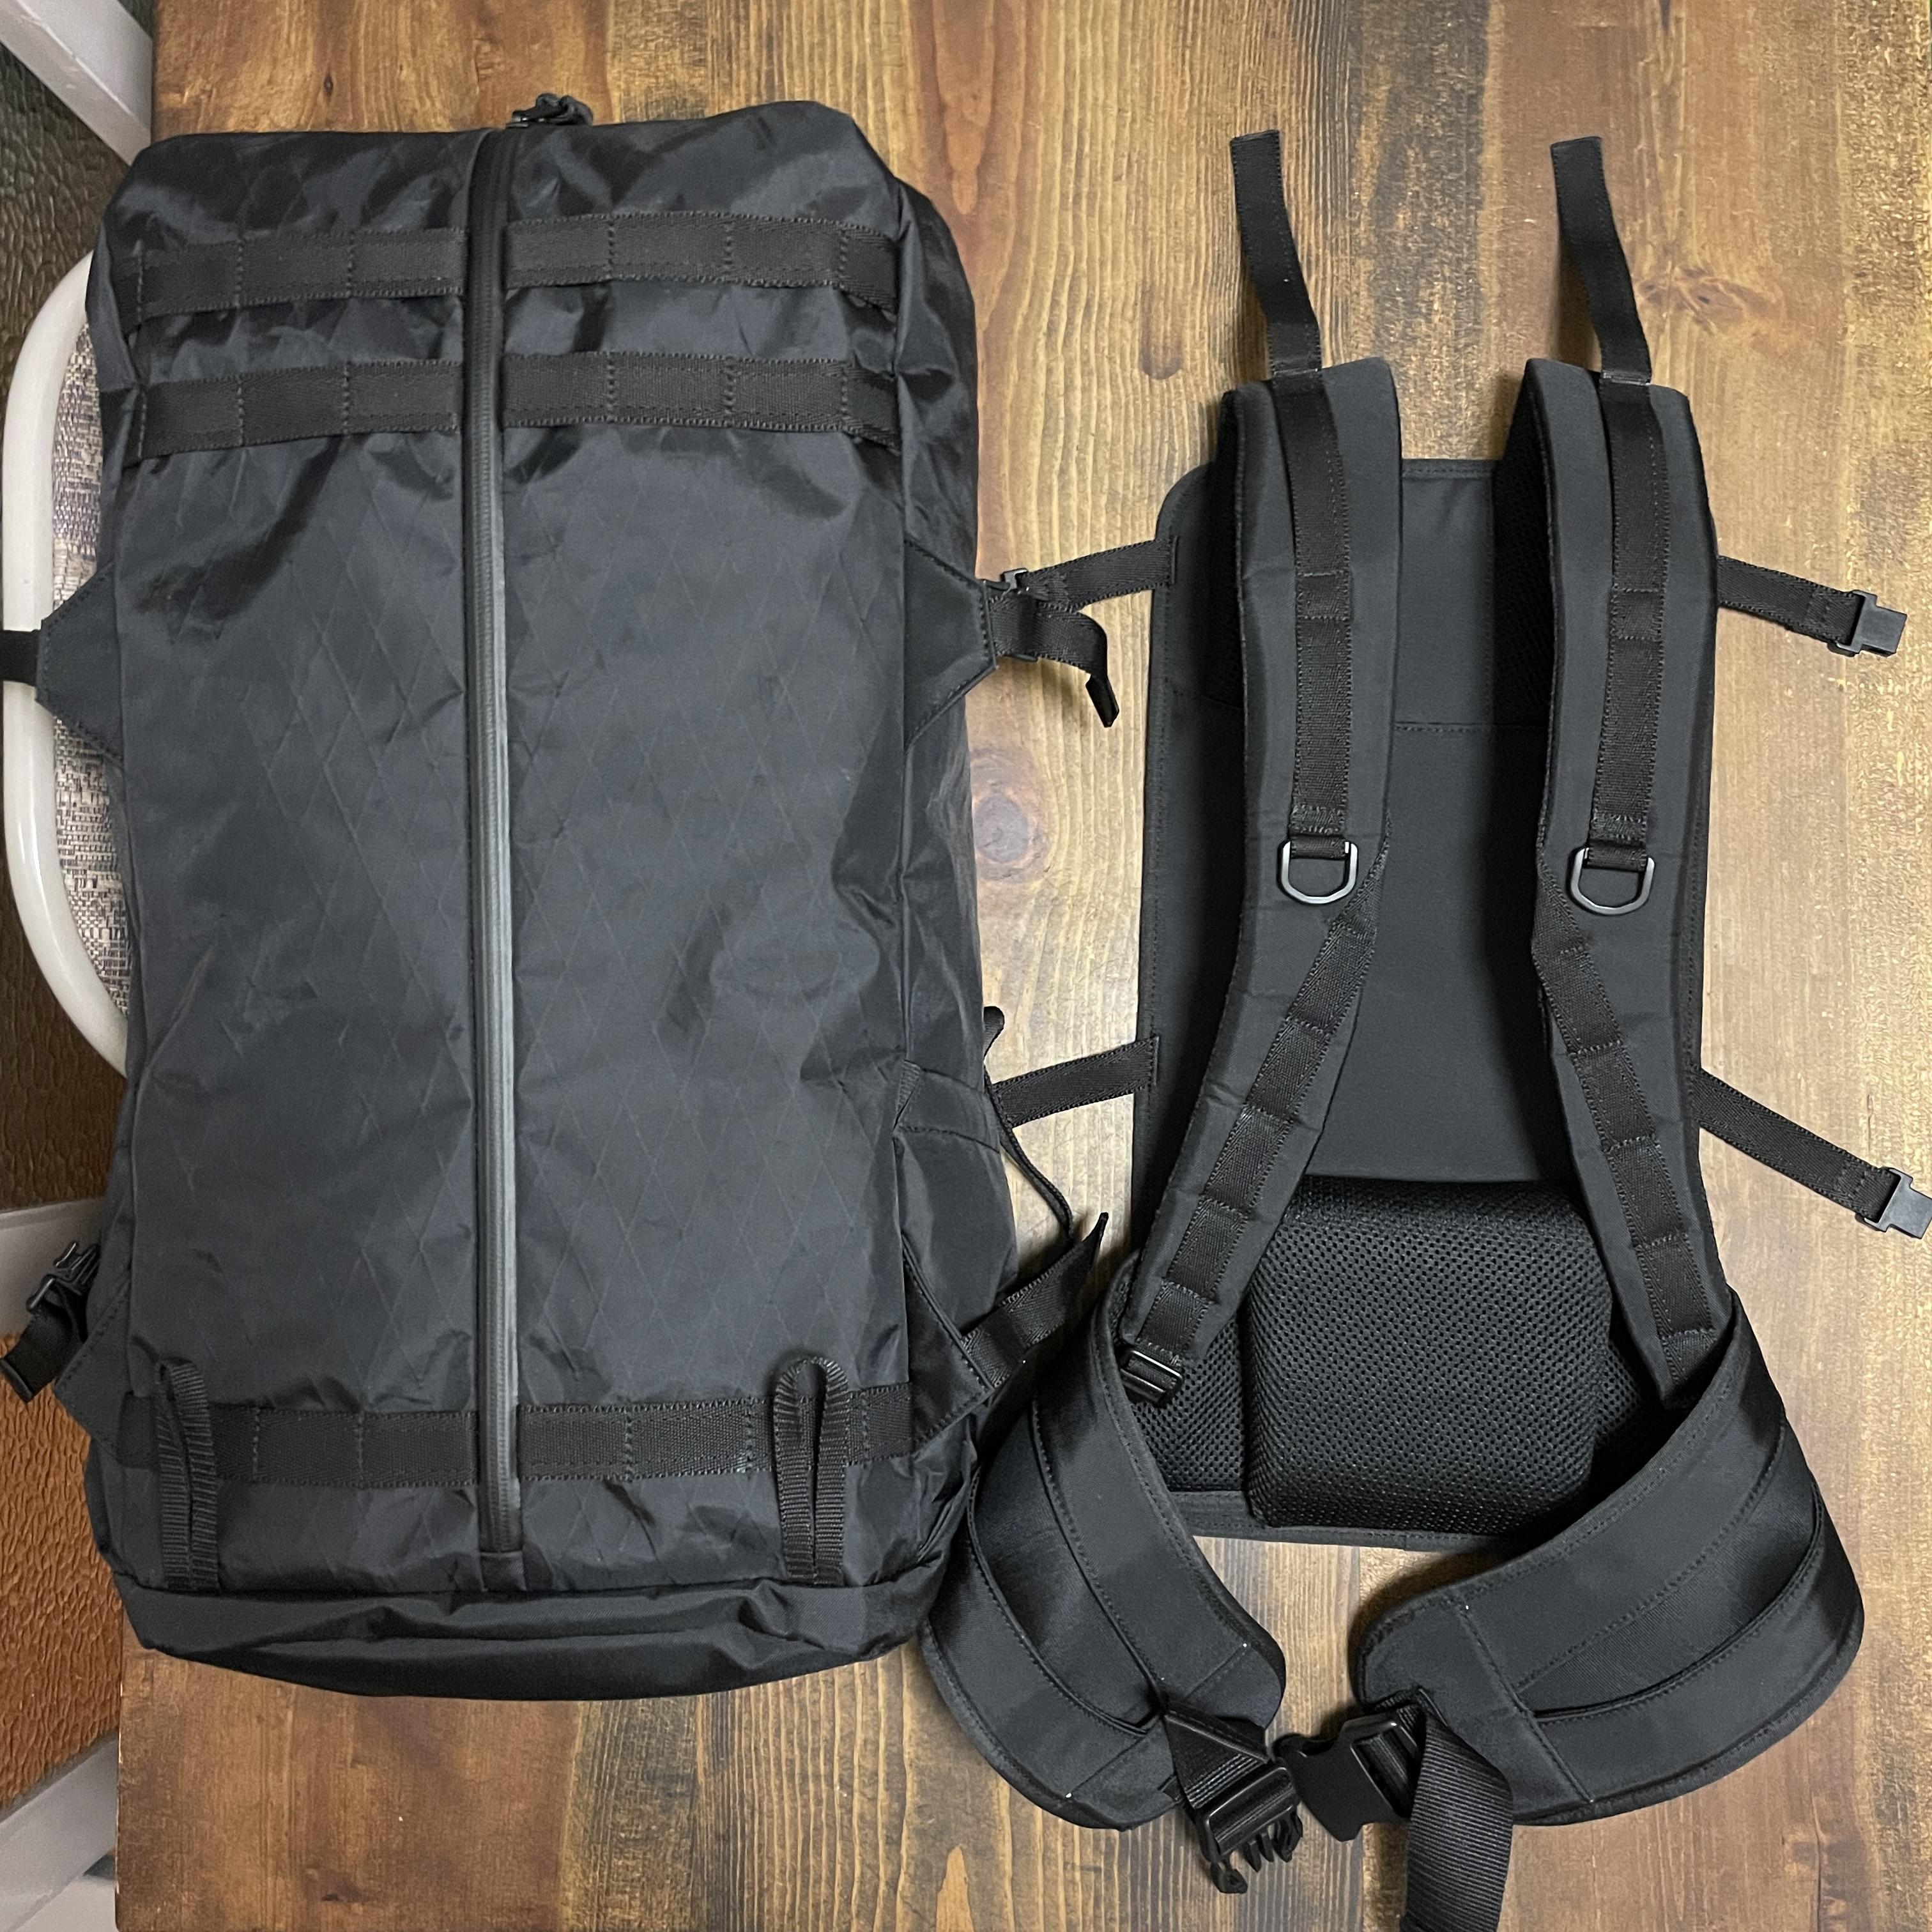 An Ergonomic Backpack with Comfortable Wearing - Backpacking Light